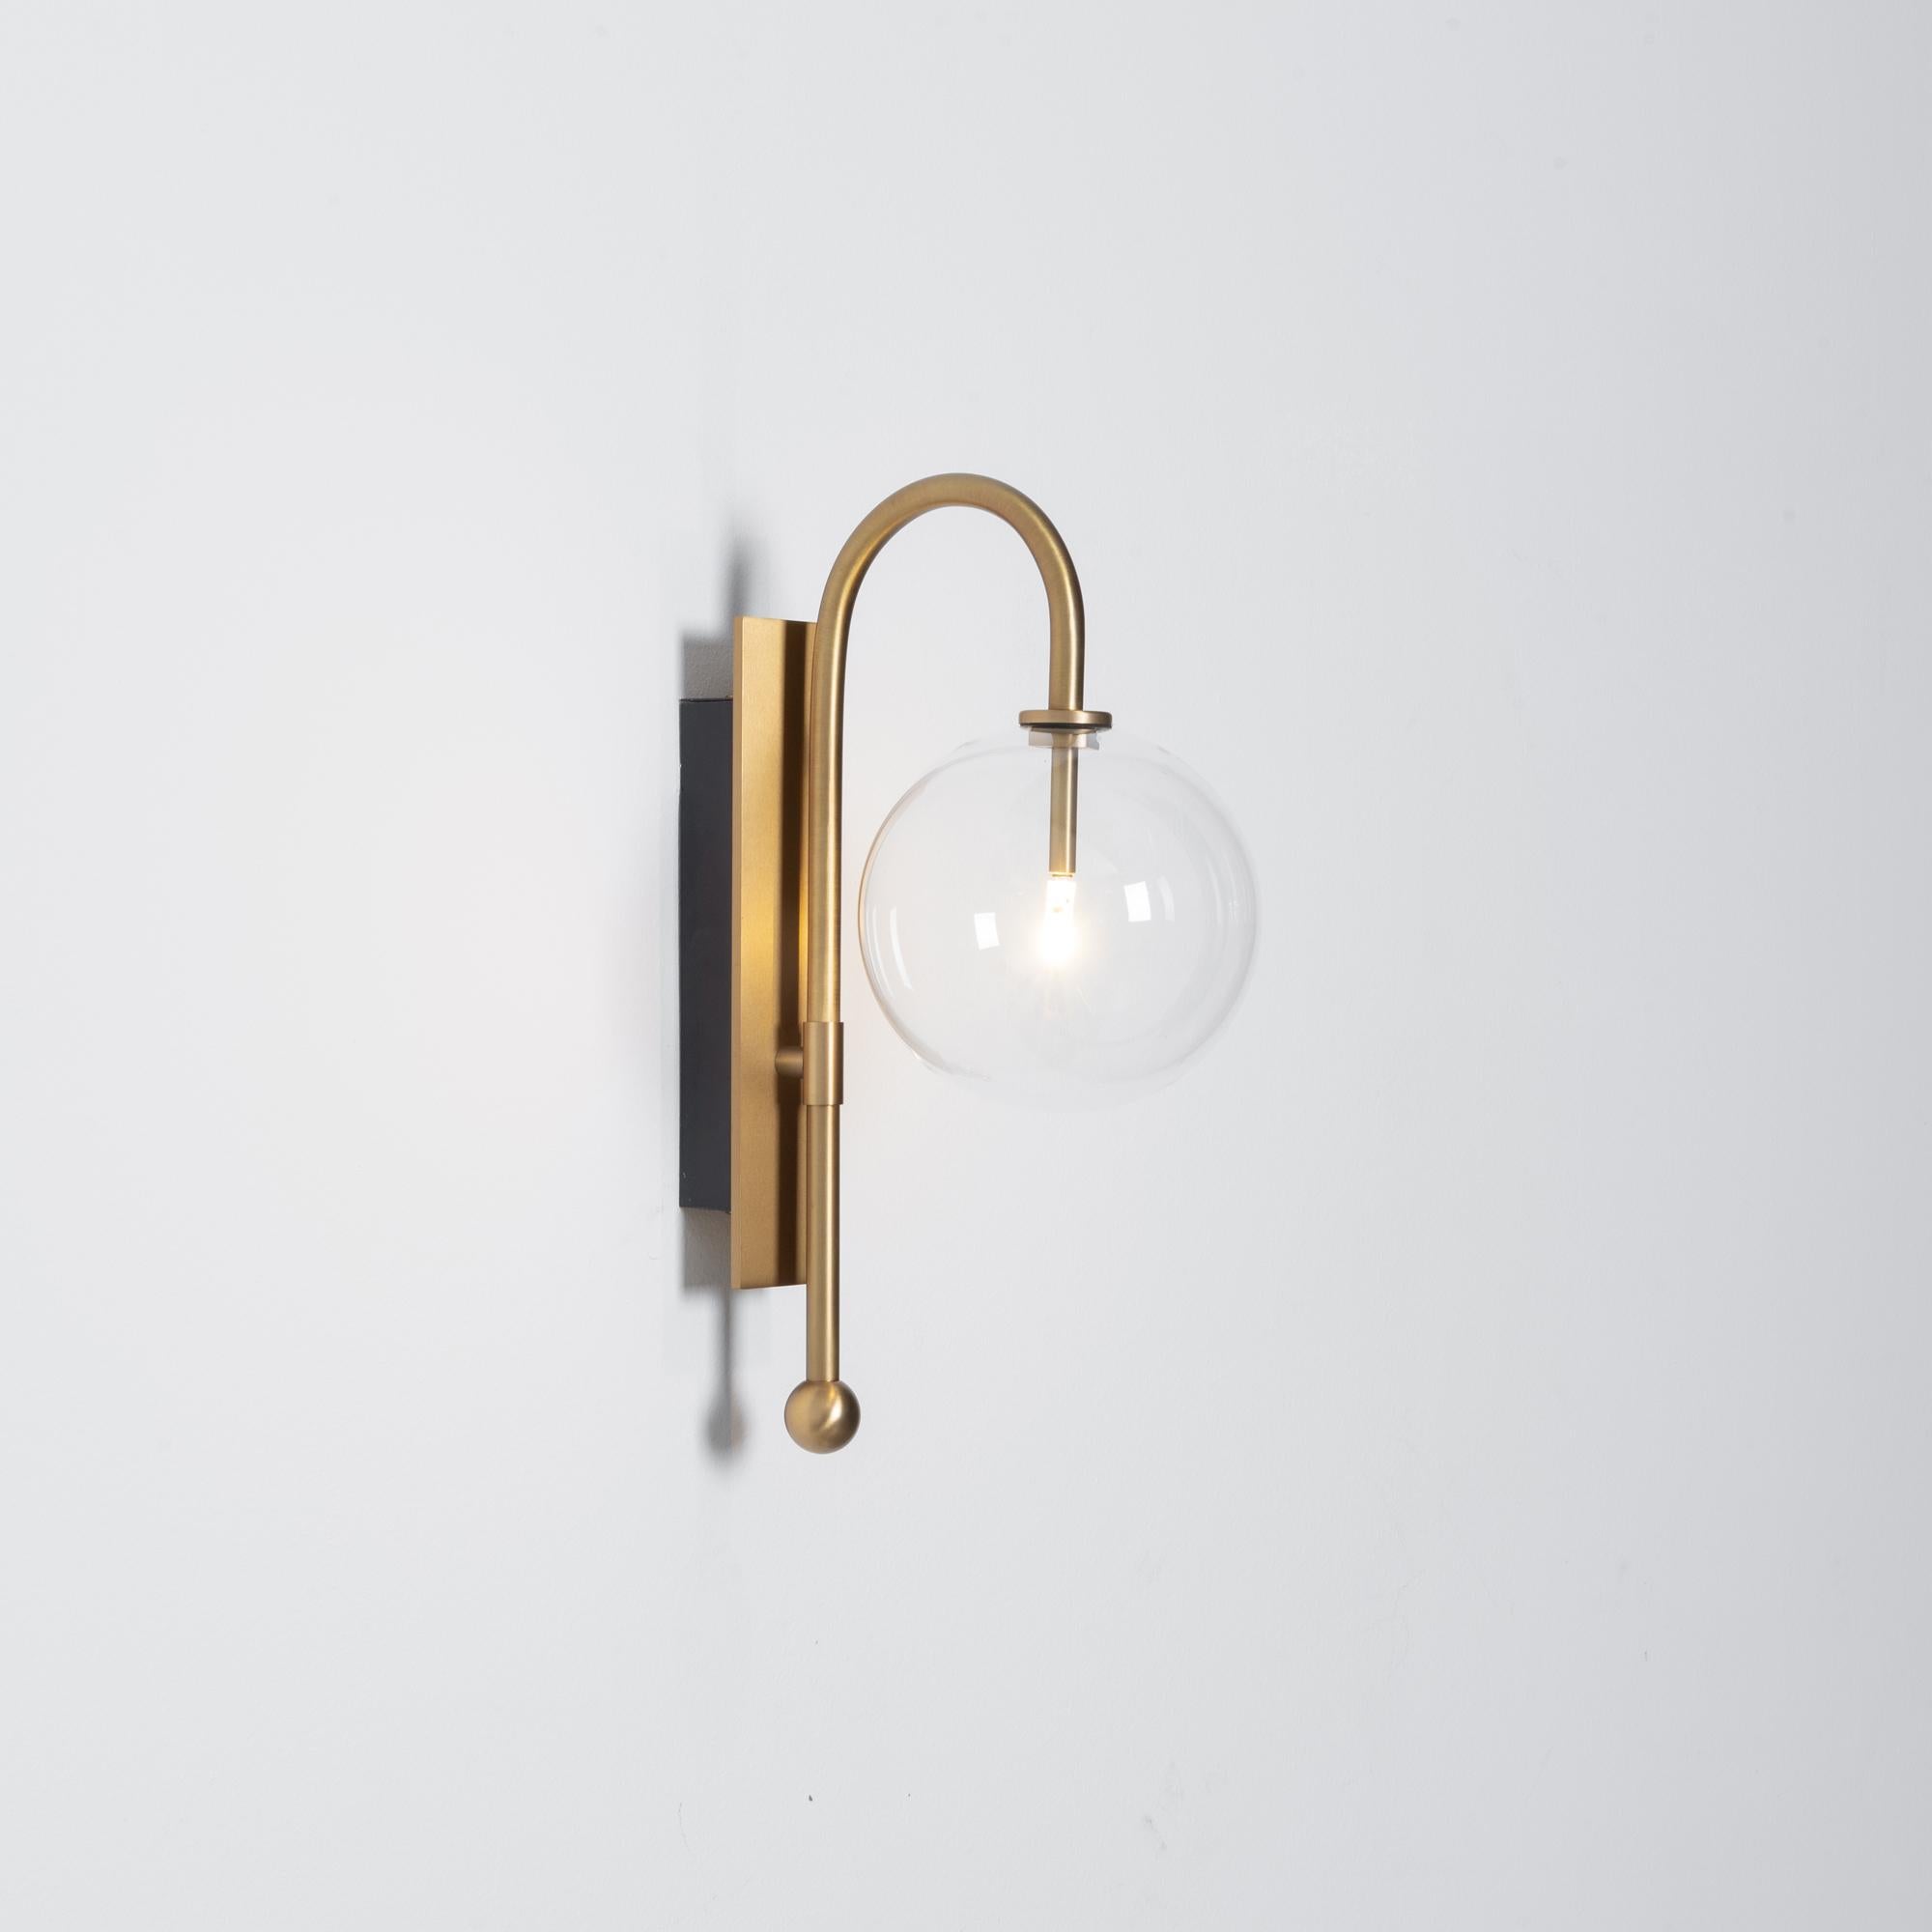 Naples Brass Wall Sconce by Schwung
Dimensions: W 15 x D 23 x H 37 cm
Materials: Brass, hand blown glass globes

Finishes available: Black gunmetal, polished nickel, brass
 

 Schwung is a german word, and loosely defined, means energy or